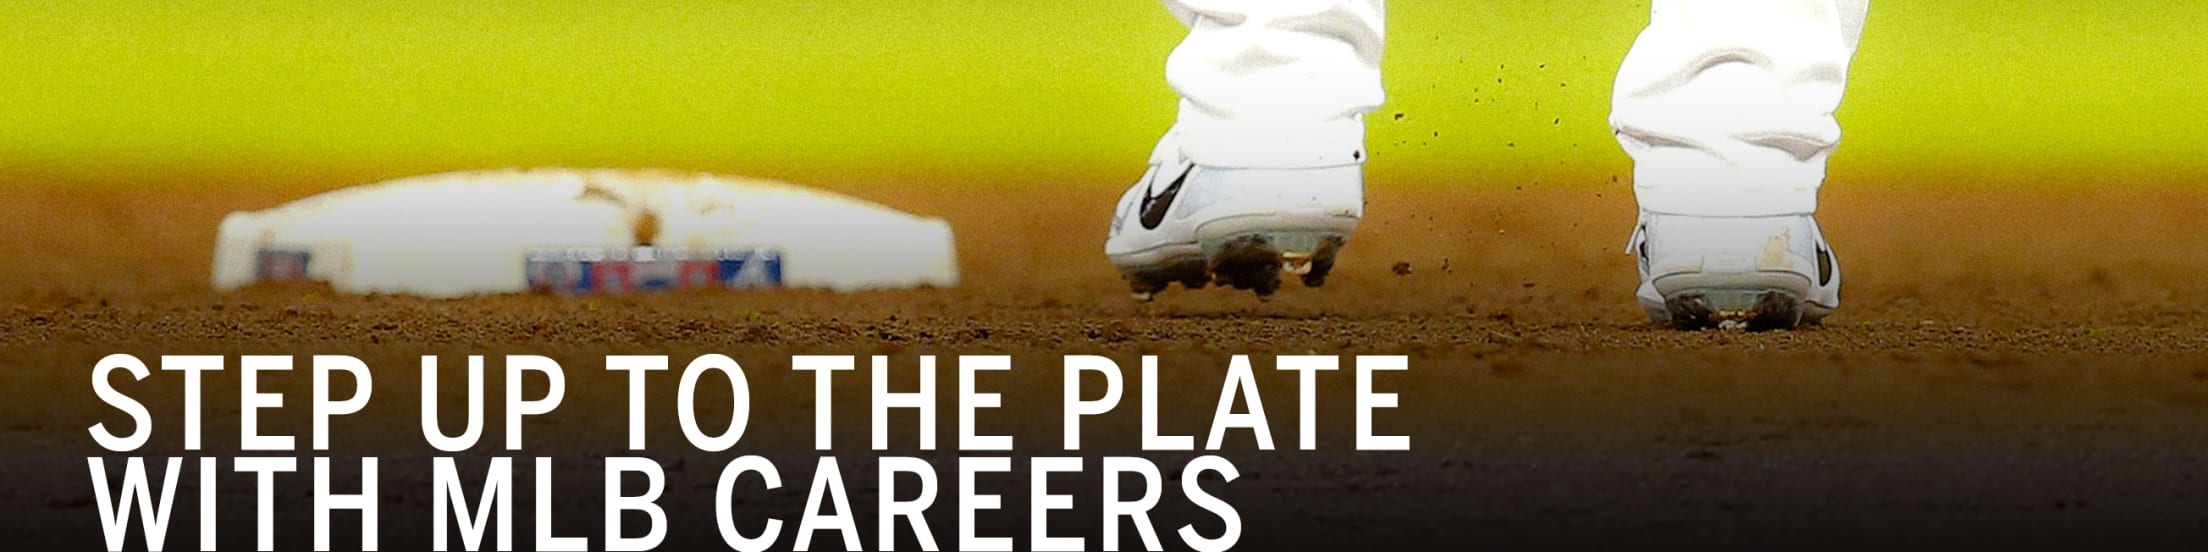 10 MLB Jobs For All Career Levels  Jobs In Sports